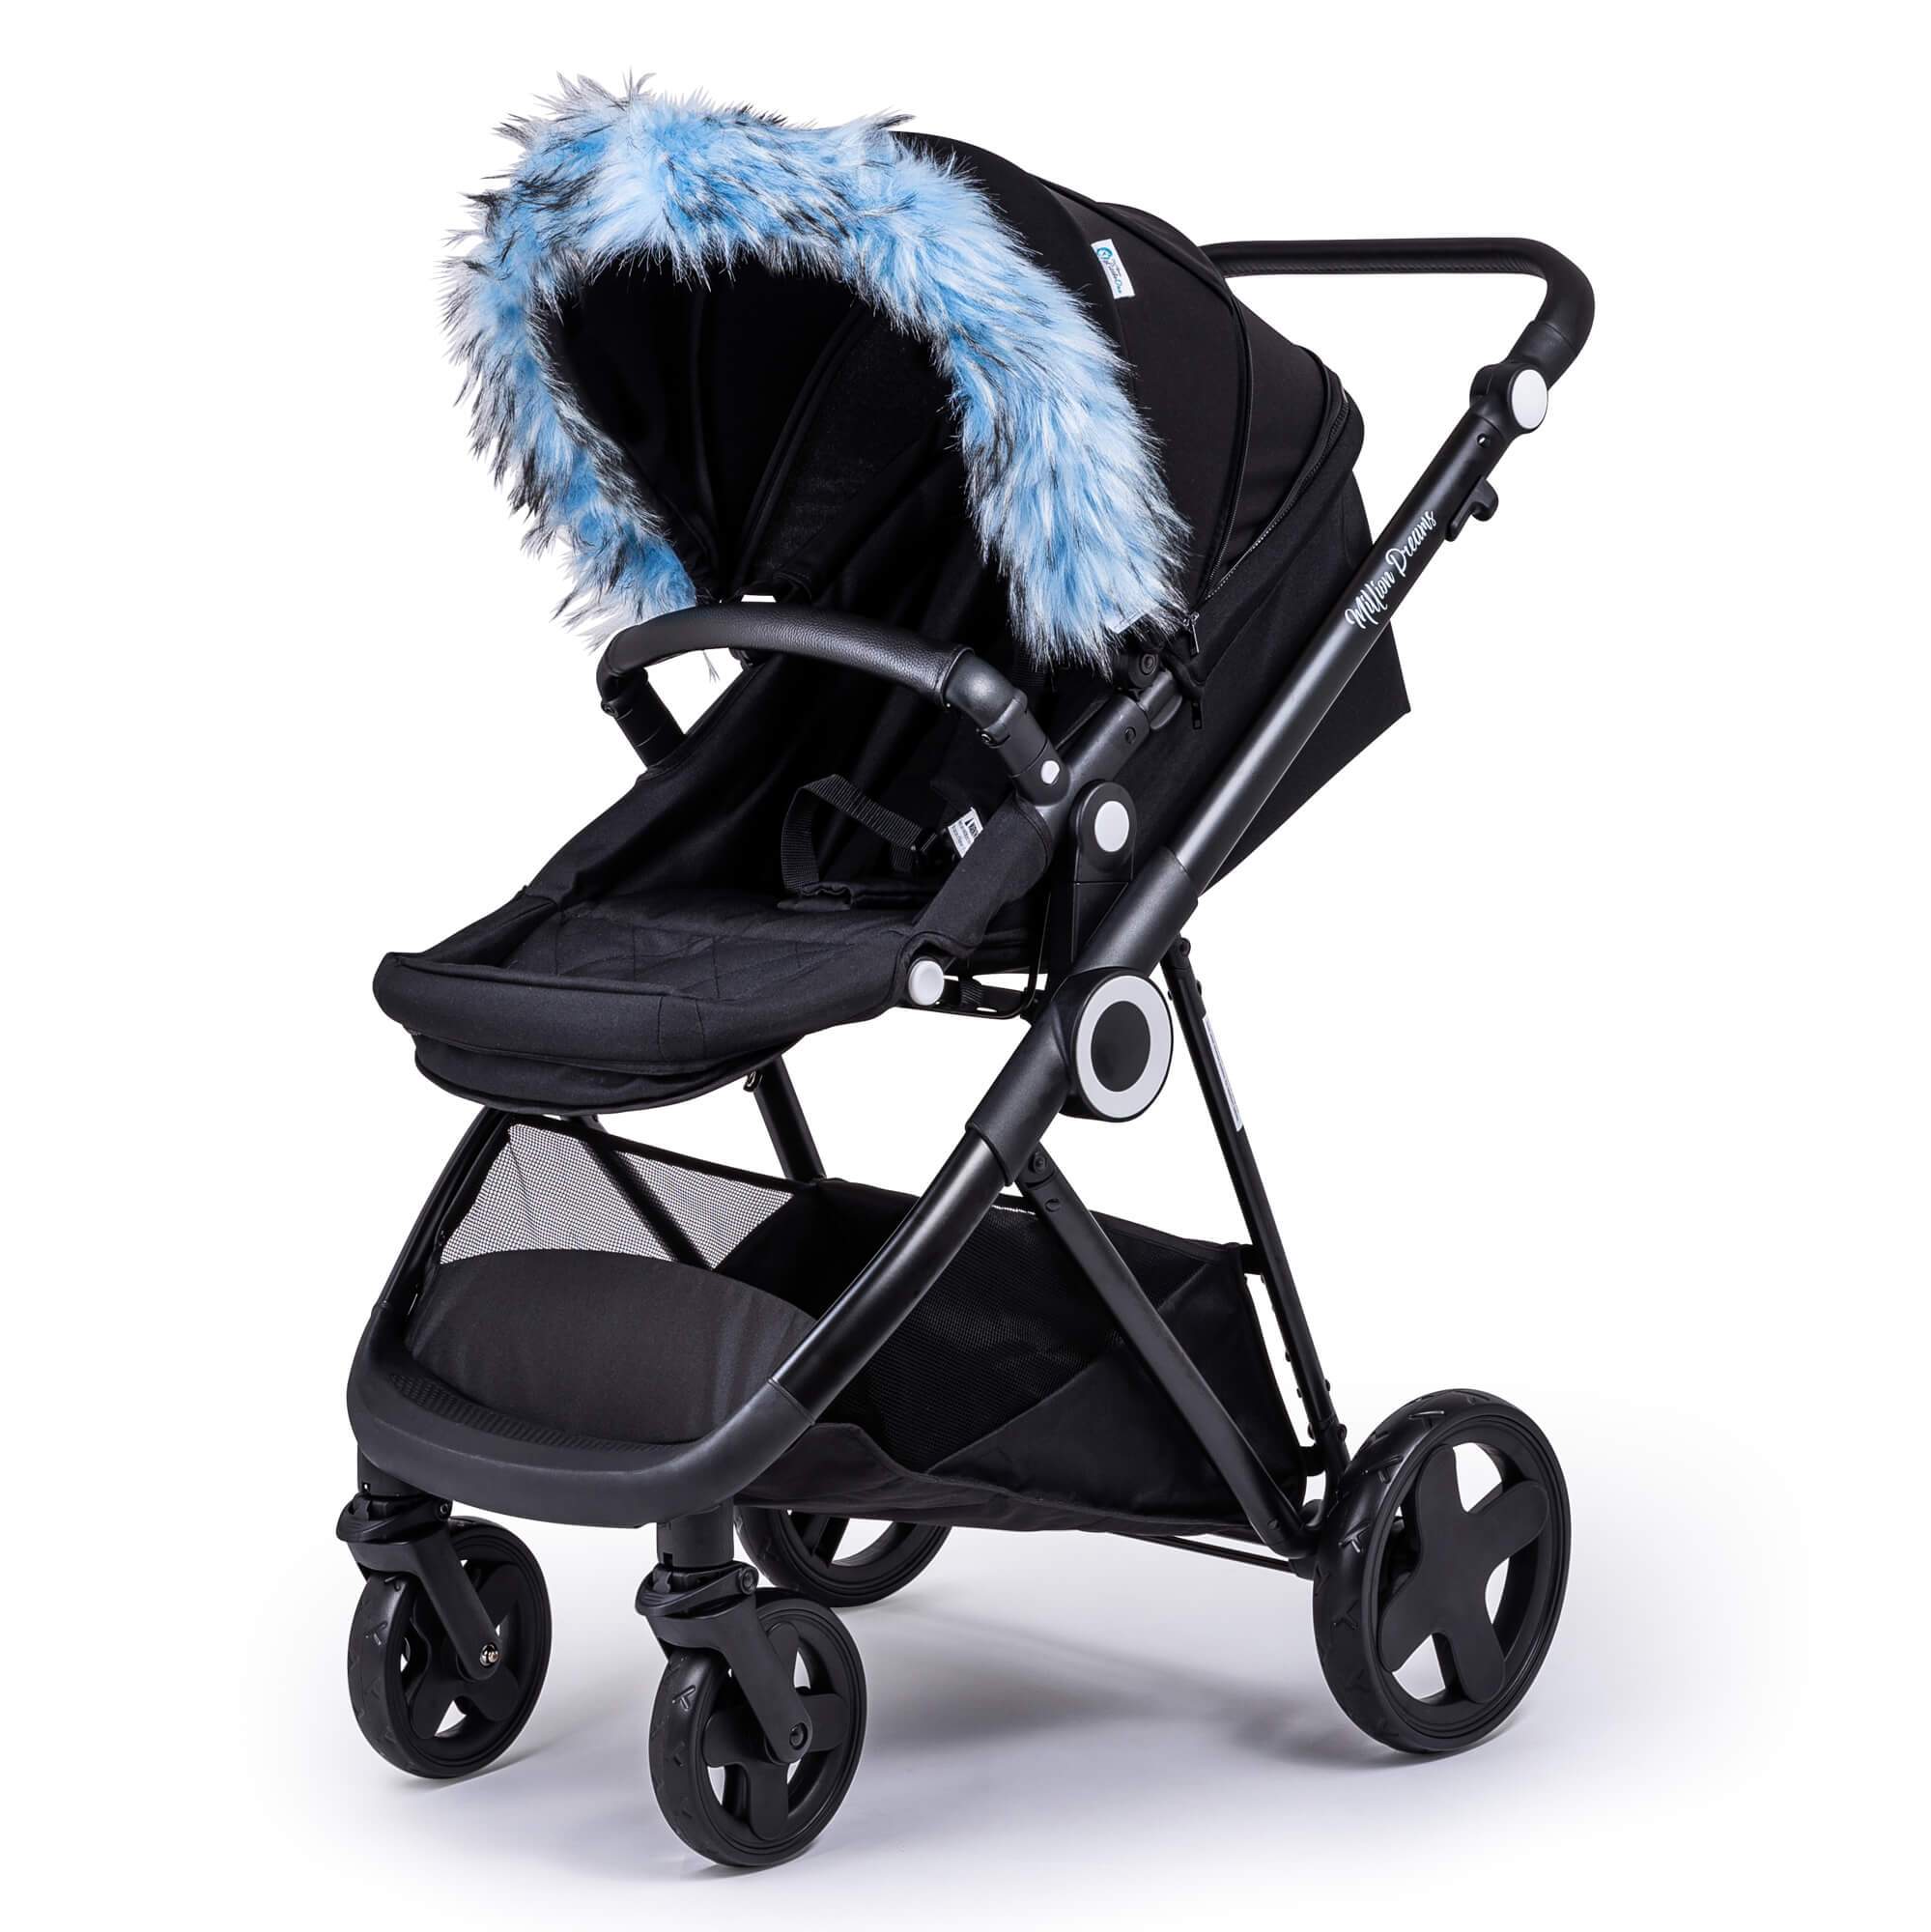 Pram Fur Hood Trim Attachment for Pushchair Compatible with Little Shield - Light Blue / Fits All Models | For Your Little One